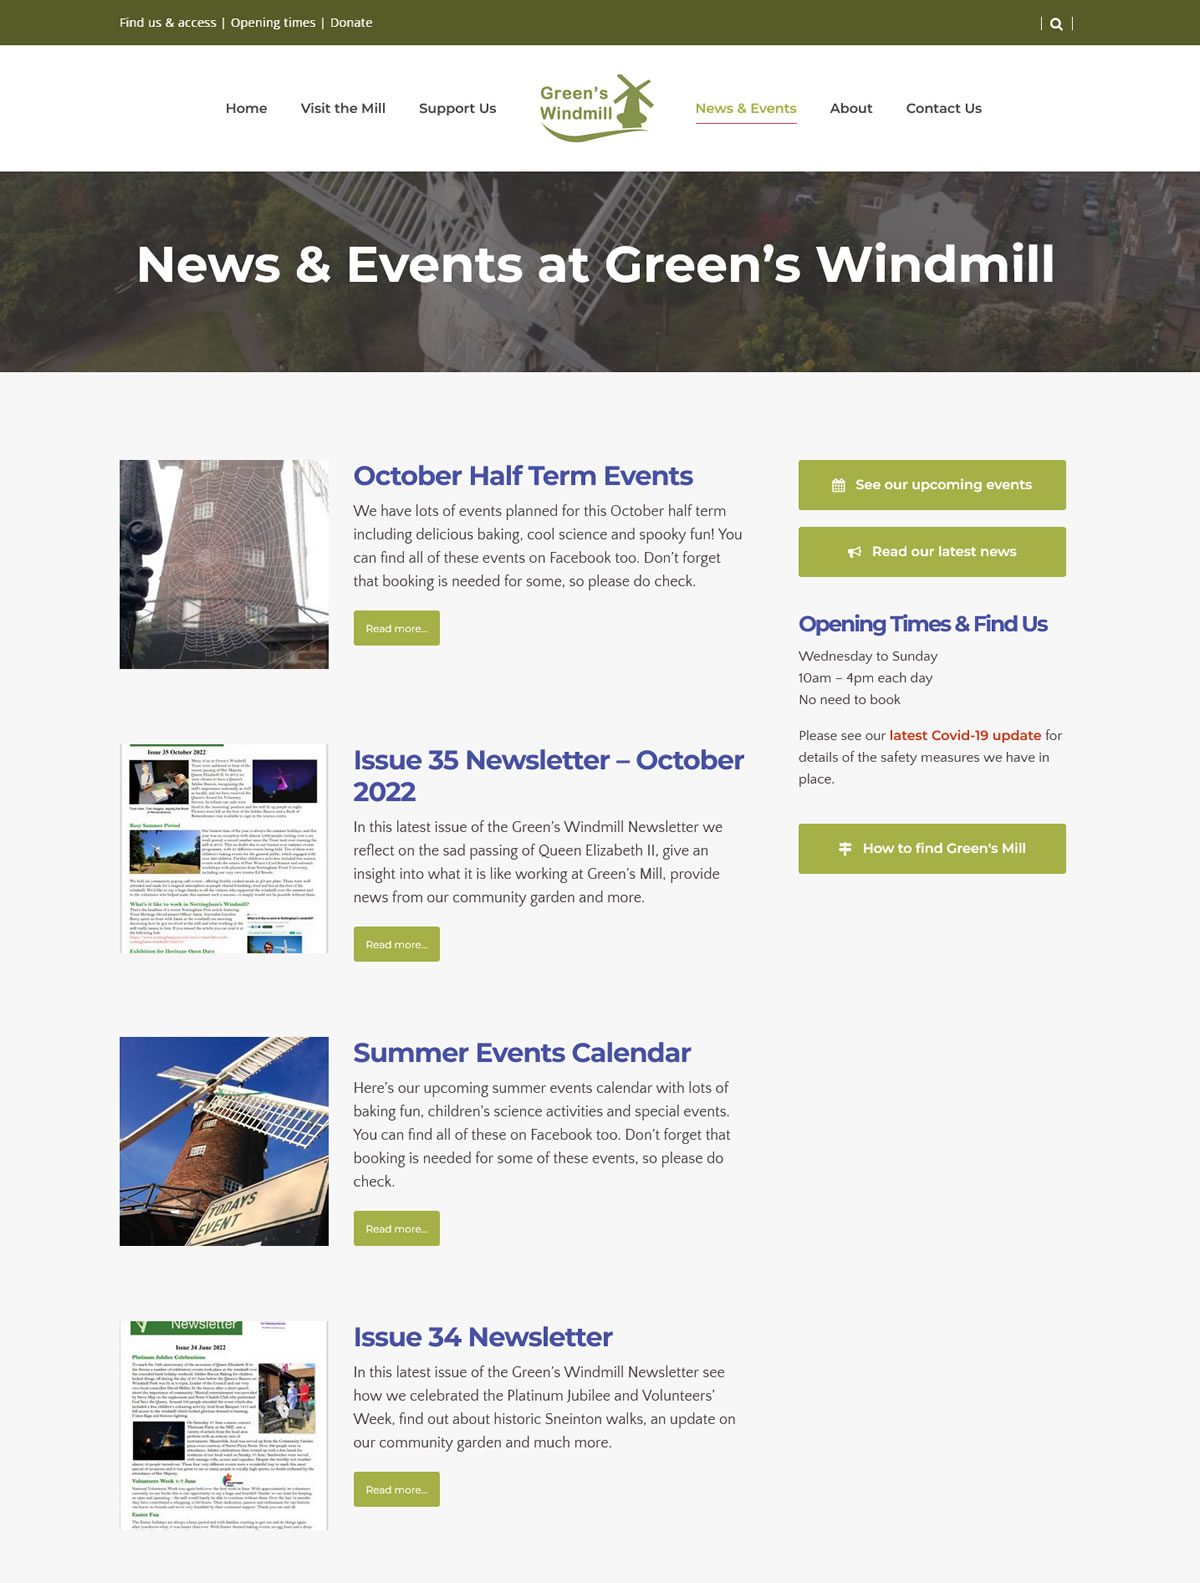 Green’s Windmill News & Events archive